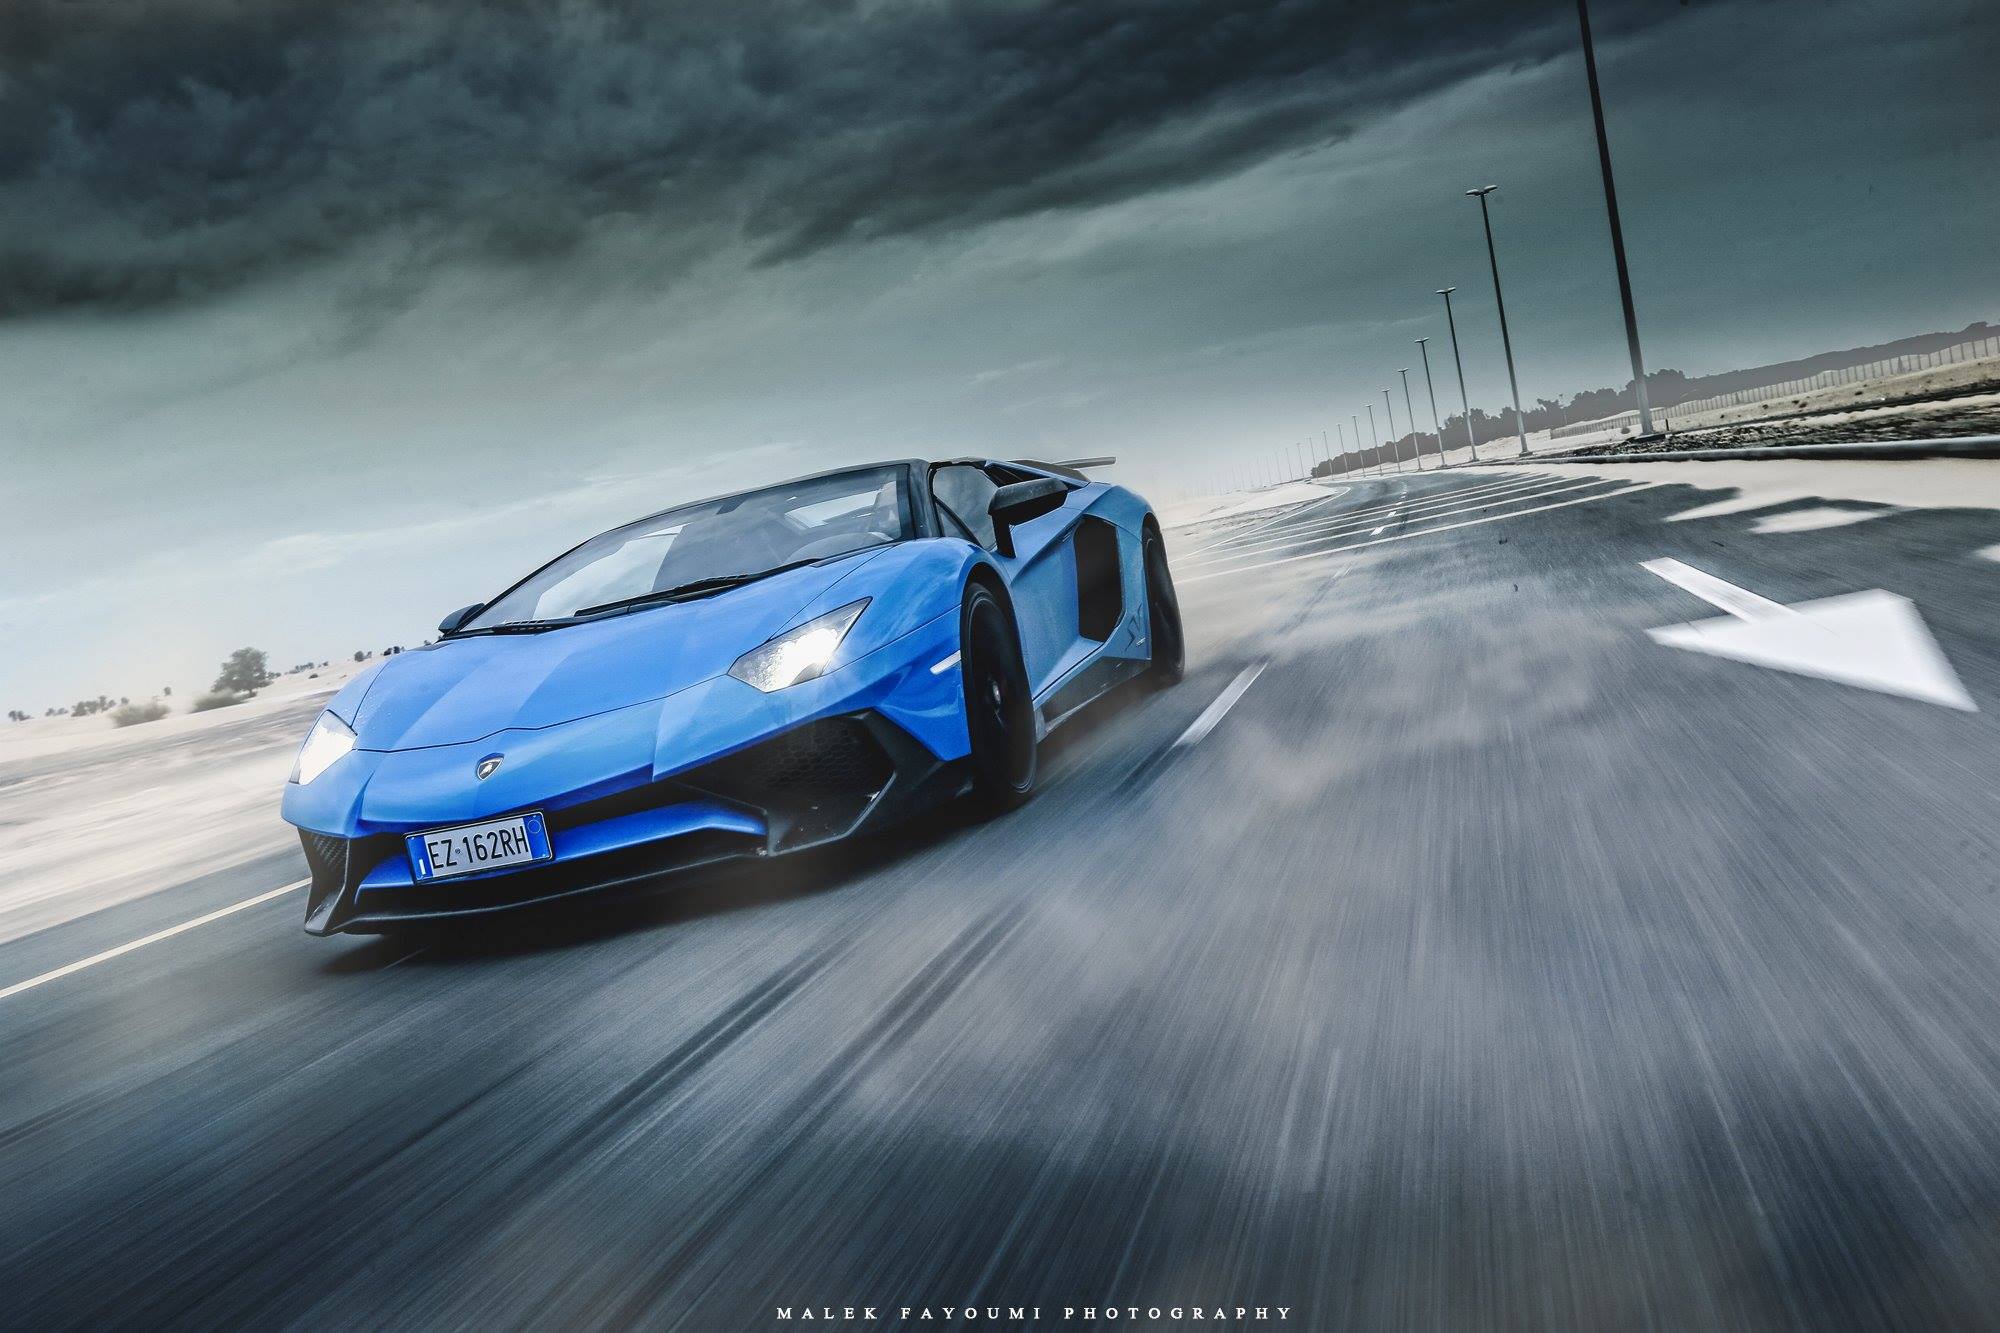 Here is another amazing picture of the Lamborghini Aventador SV Roadster that I thought was worth sharing. I personally use this one as my desktop background on my computer